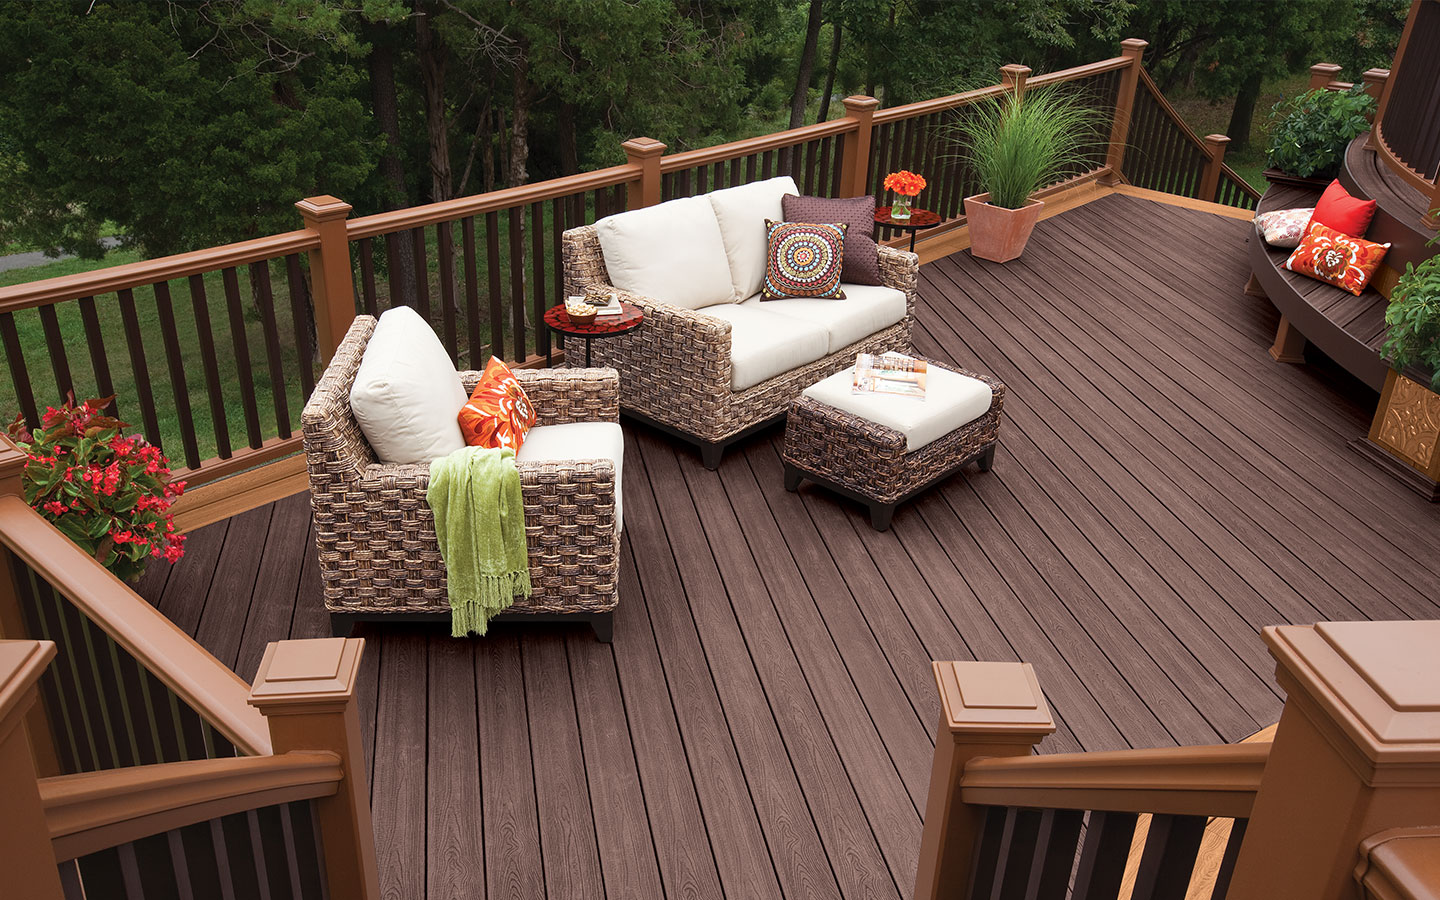 deck designs the standard rectangular deck design allows for maximum use of space and CSYNHYI